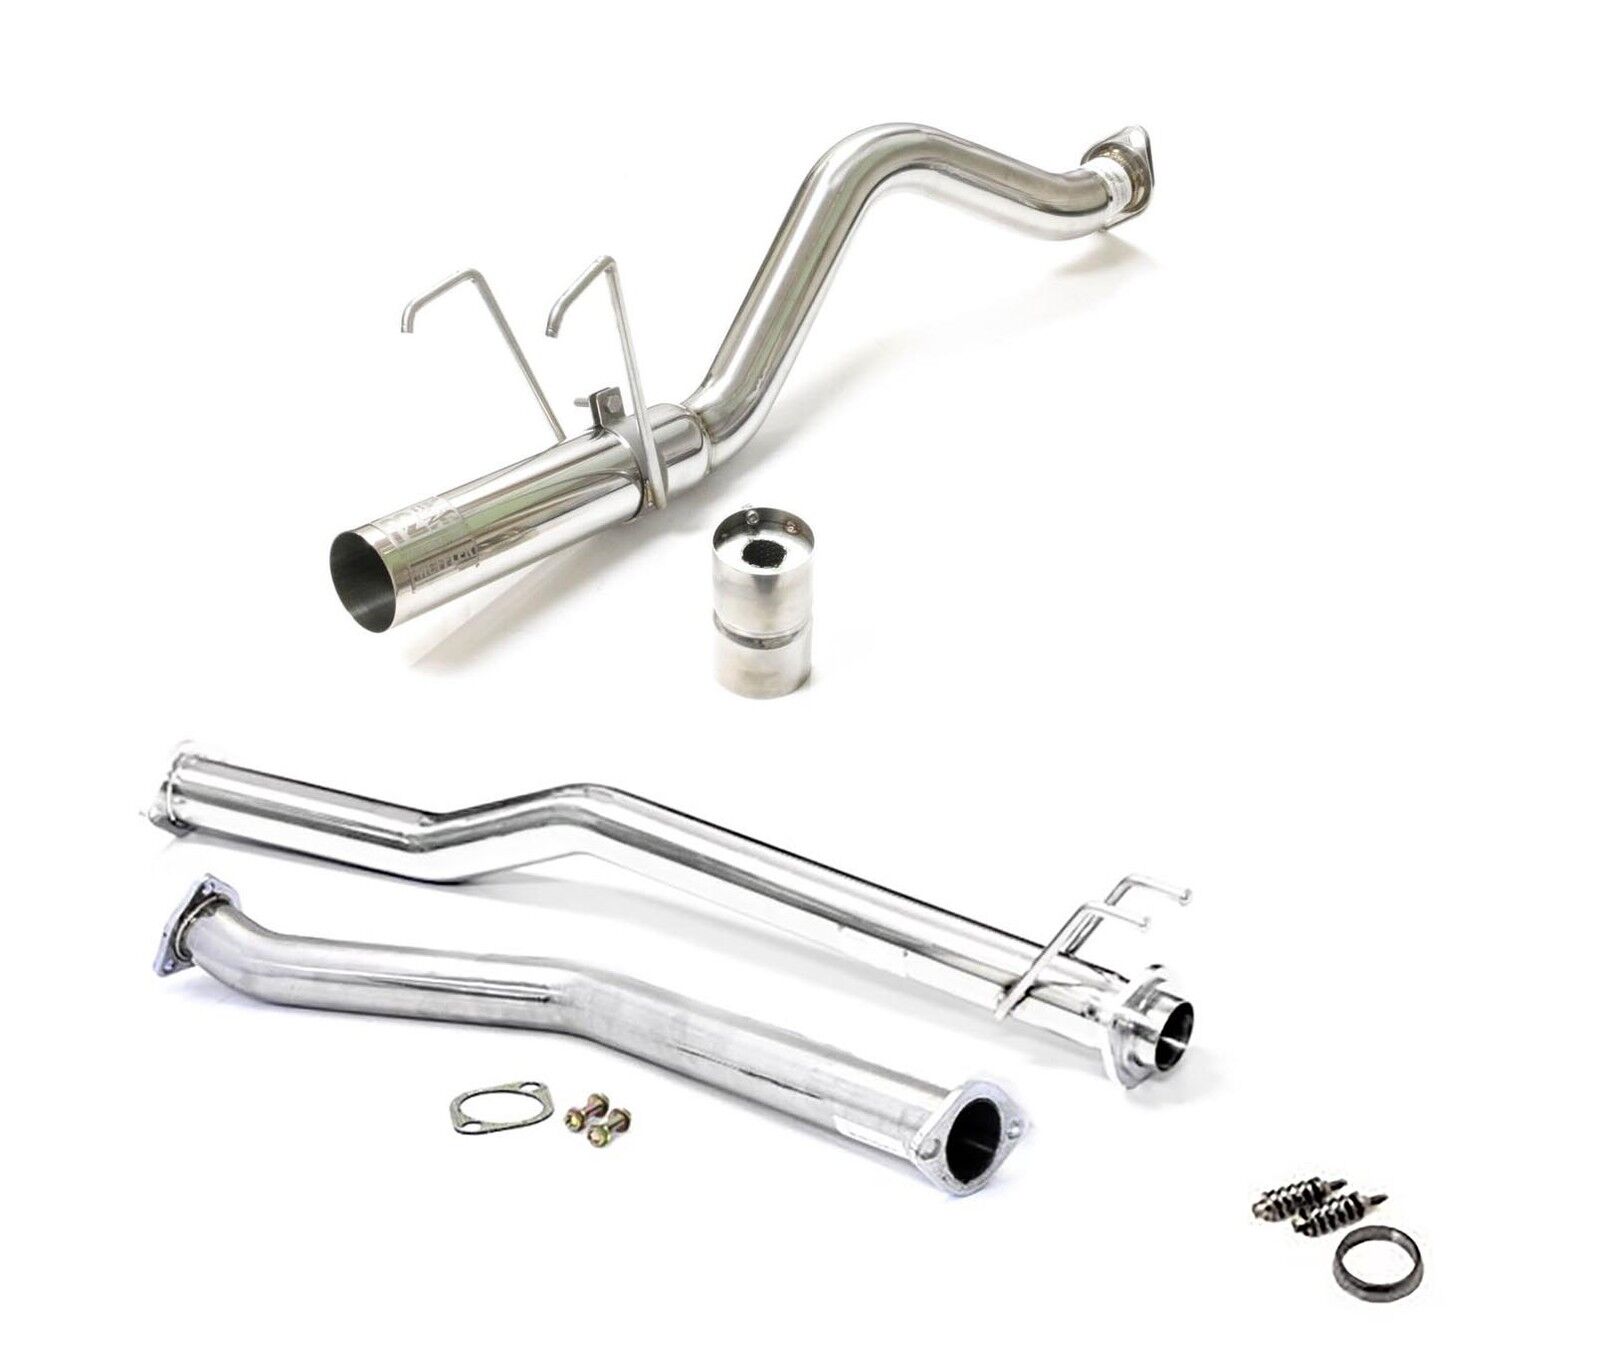 M2 HONDA CIVIC SPORT EP2 1.4 EP1 HORNET CAT BACK T304 STEEL EXHAUST SYSTEM Y3182